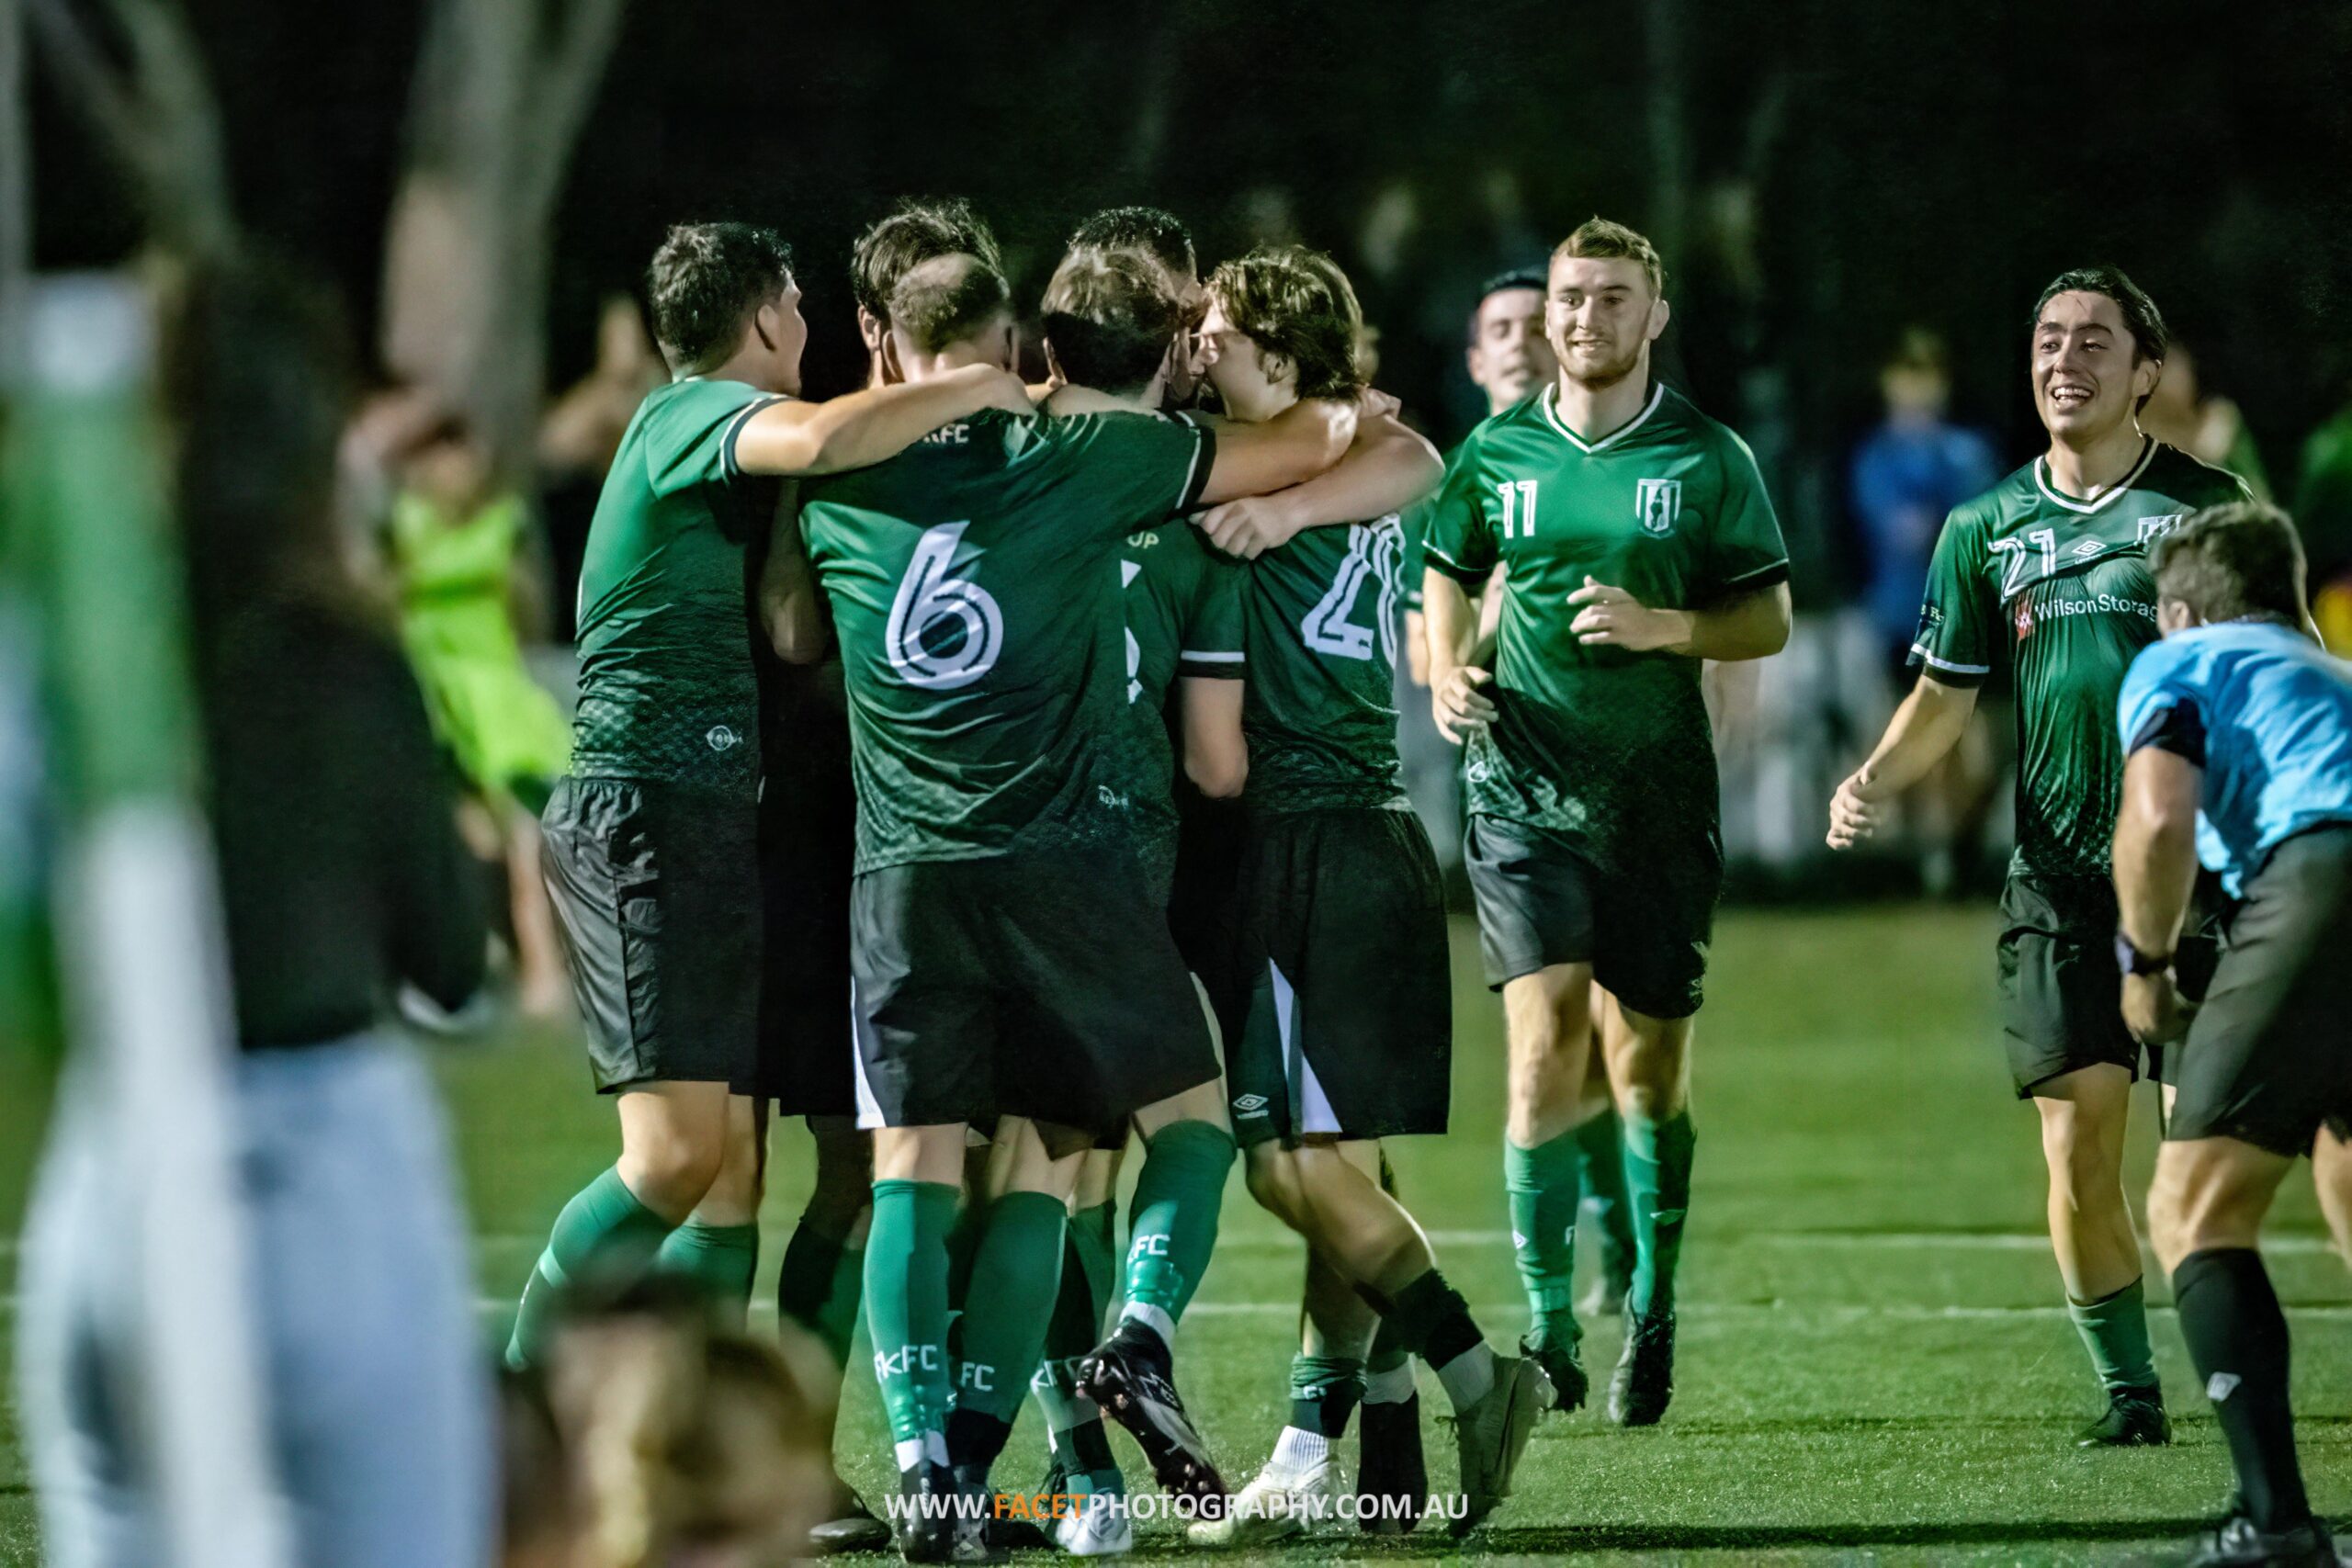 Forest Killarney celebrate a goal during their 2023 Australia Cup Round 2 game against Bankstown United at Melwood Oval. Photo credit: Jeremy Denham / Facet Photography